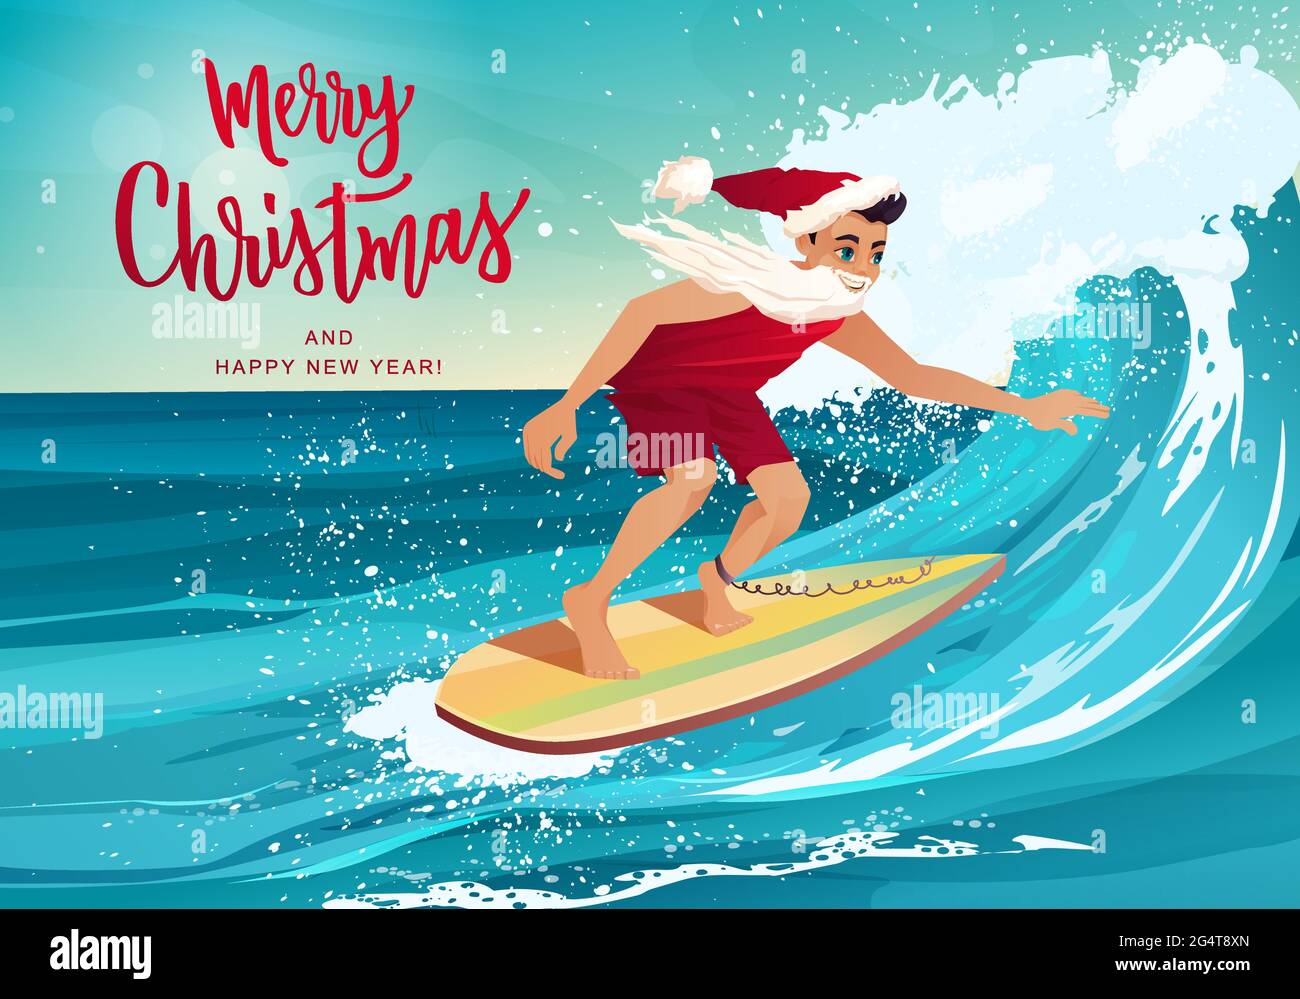 Man in clothes of Santa Claus surfing on the wave in tropical ocean. Merry Christmas hand lettering. Vacation, resort, greeting cards. Stock Vector